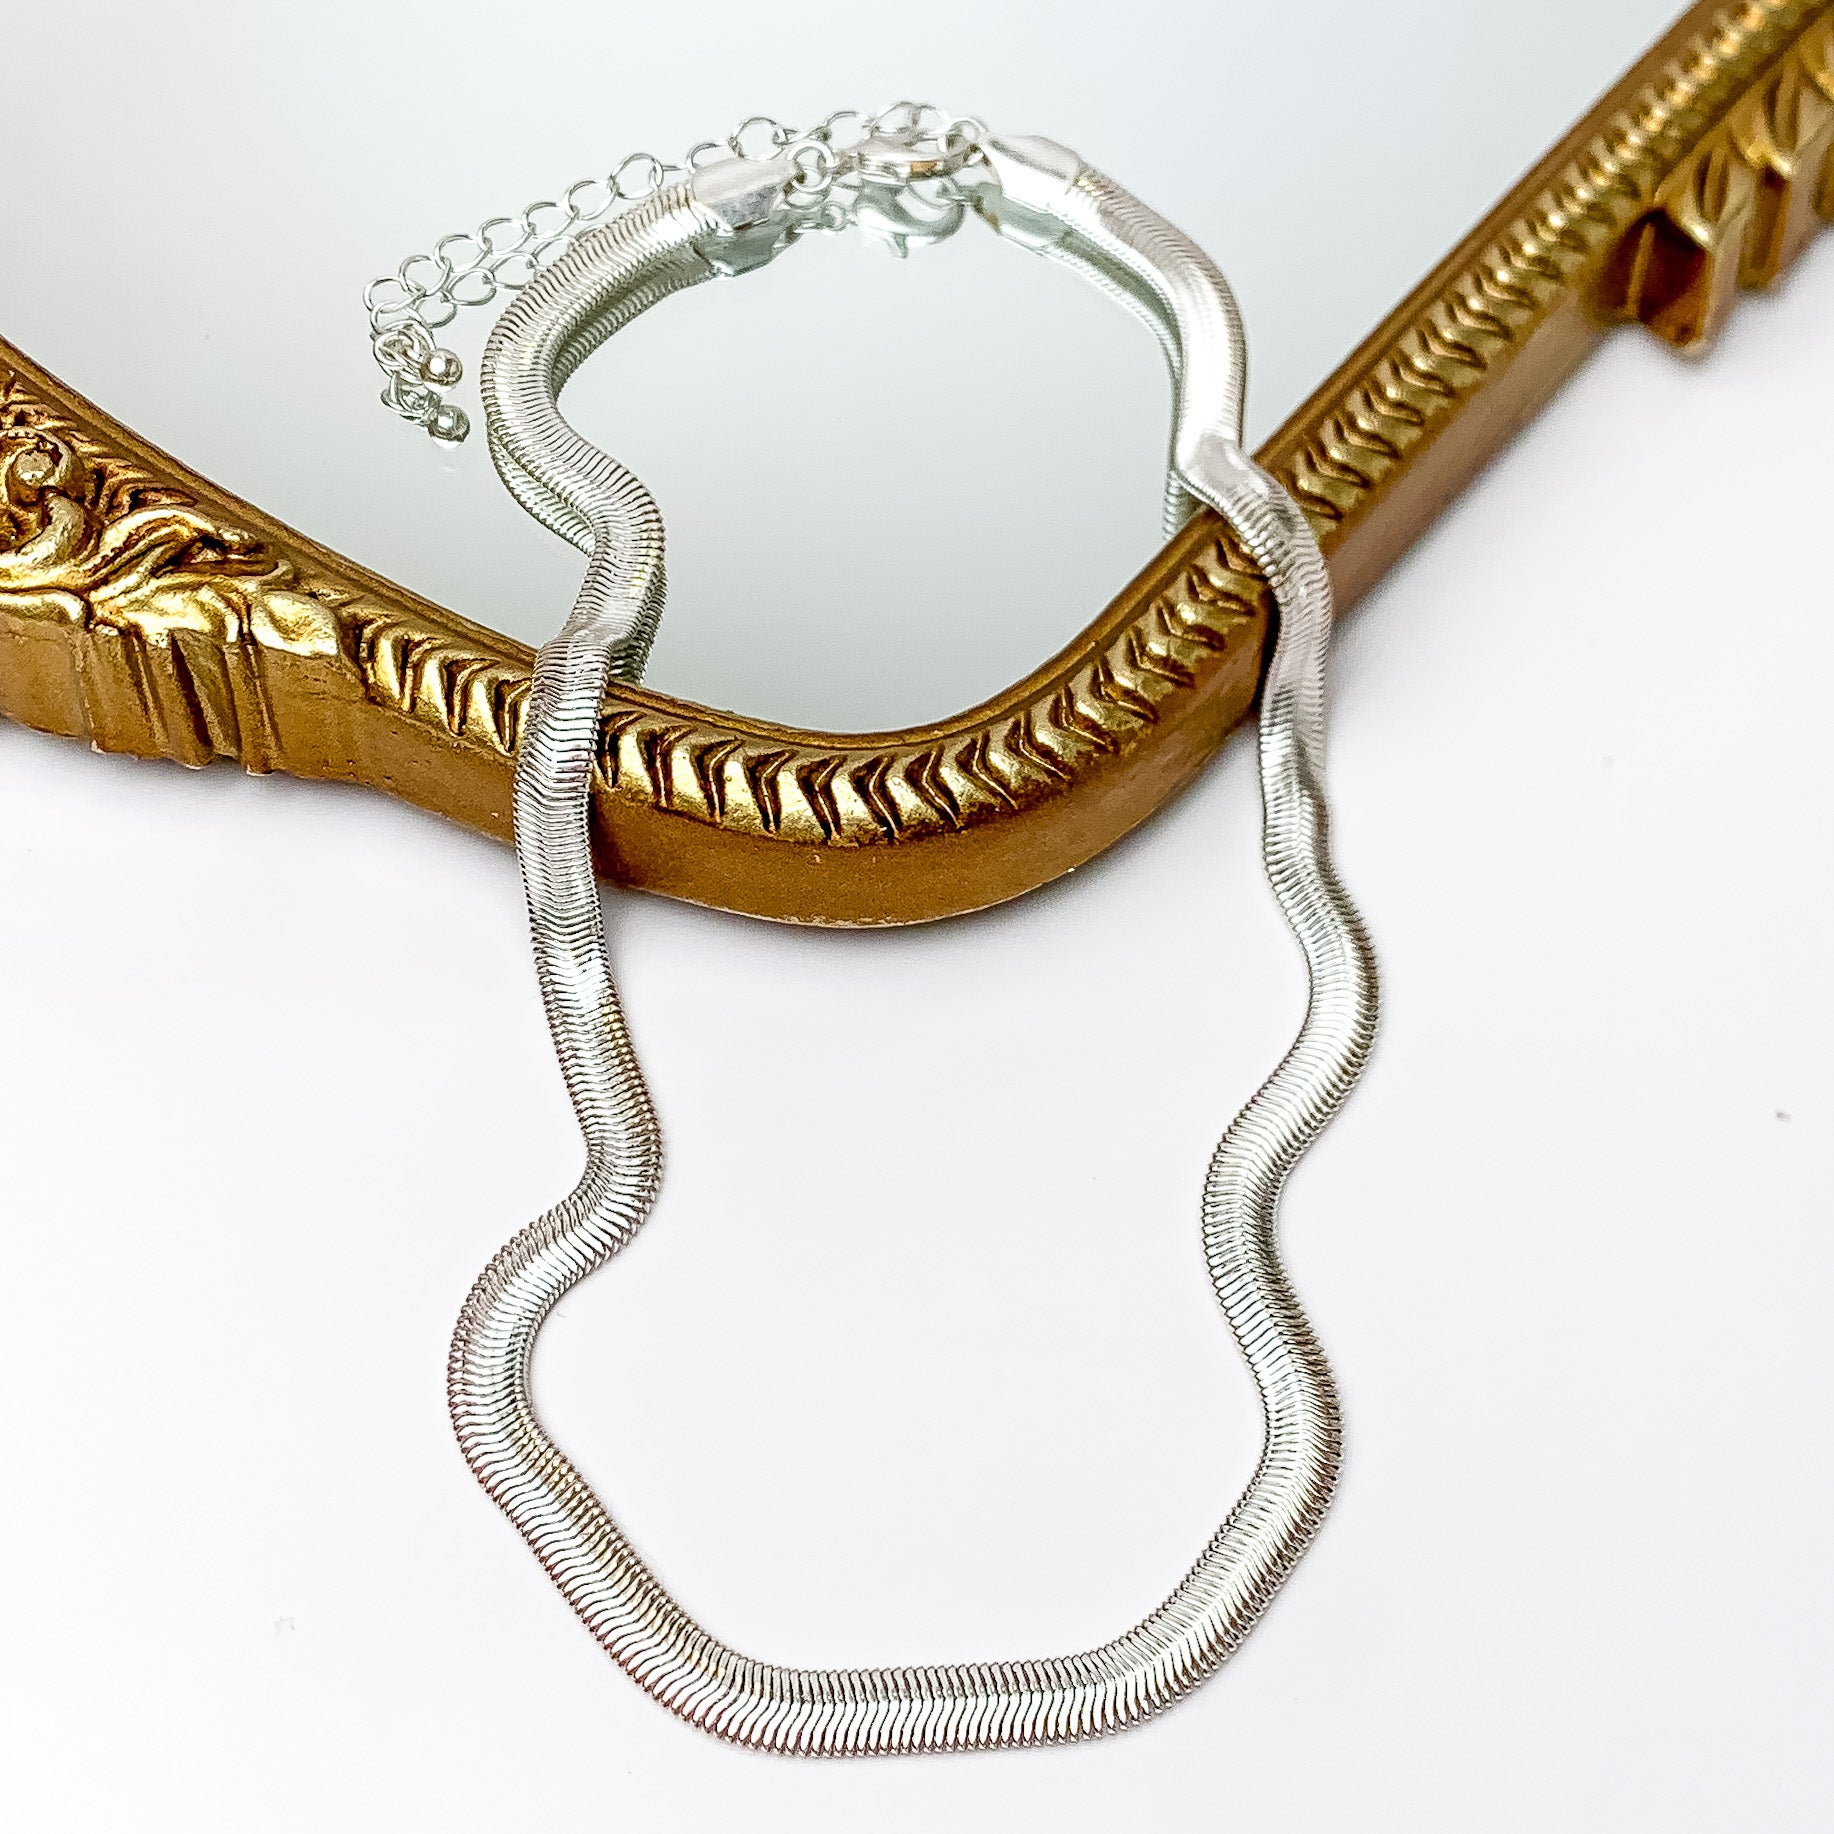 Silver tone classic chain necklace. Pictured on a white background with a gold frame through it.